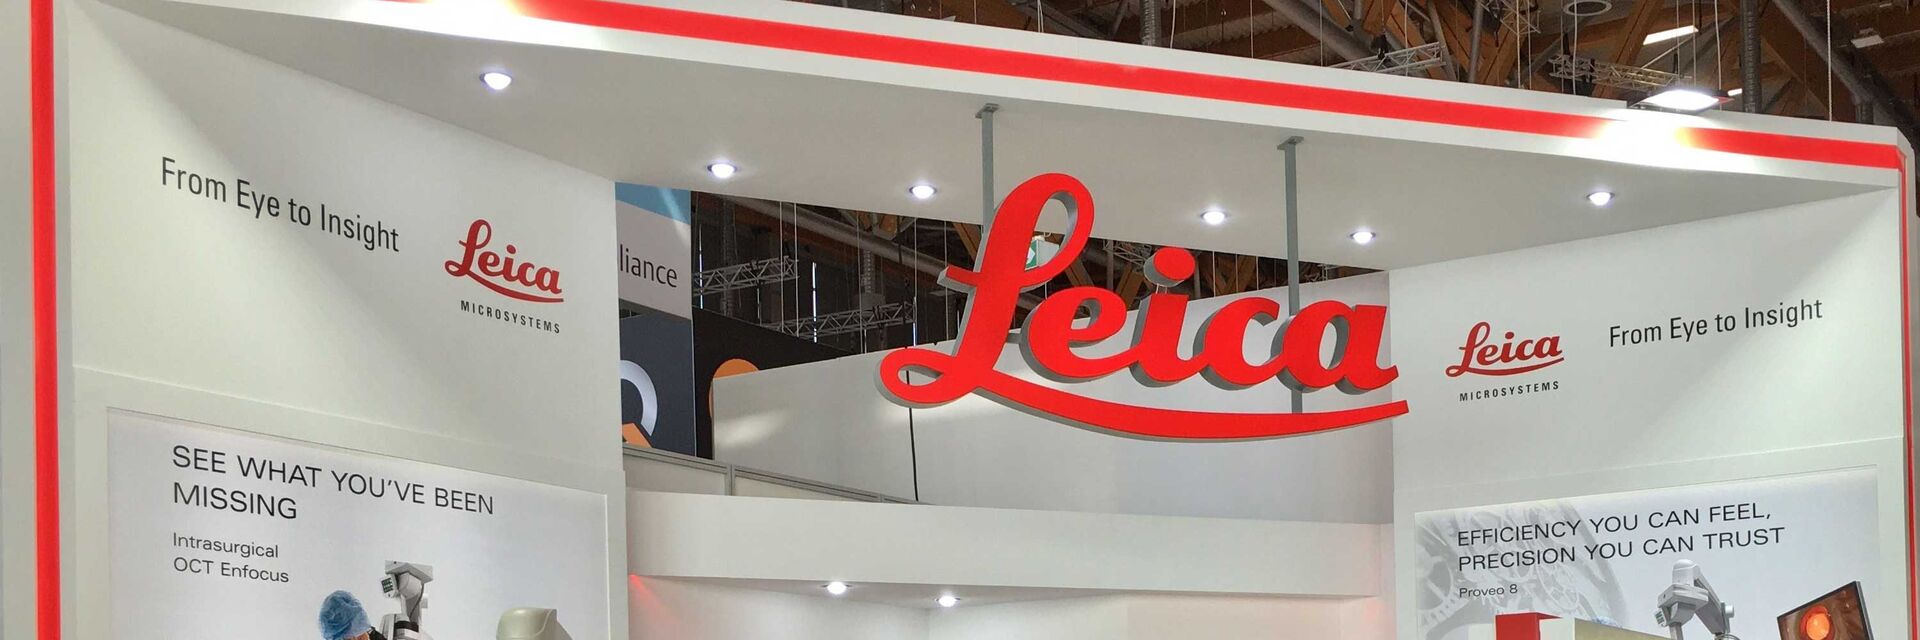 Events | Leica Microsystems